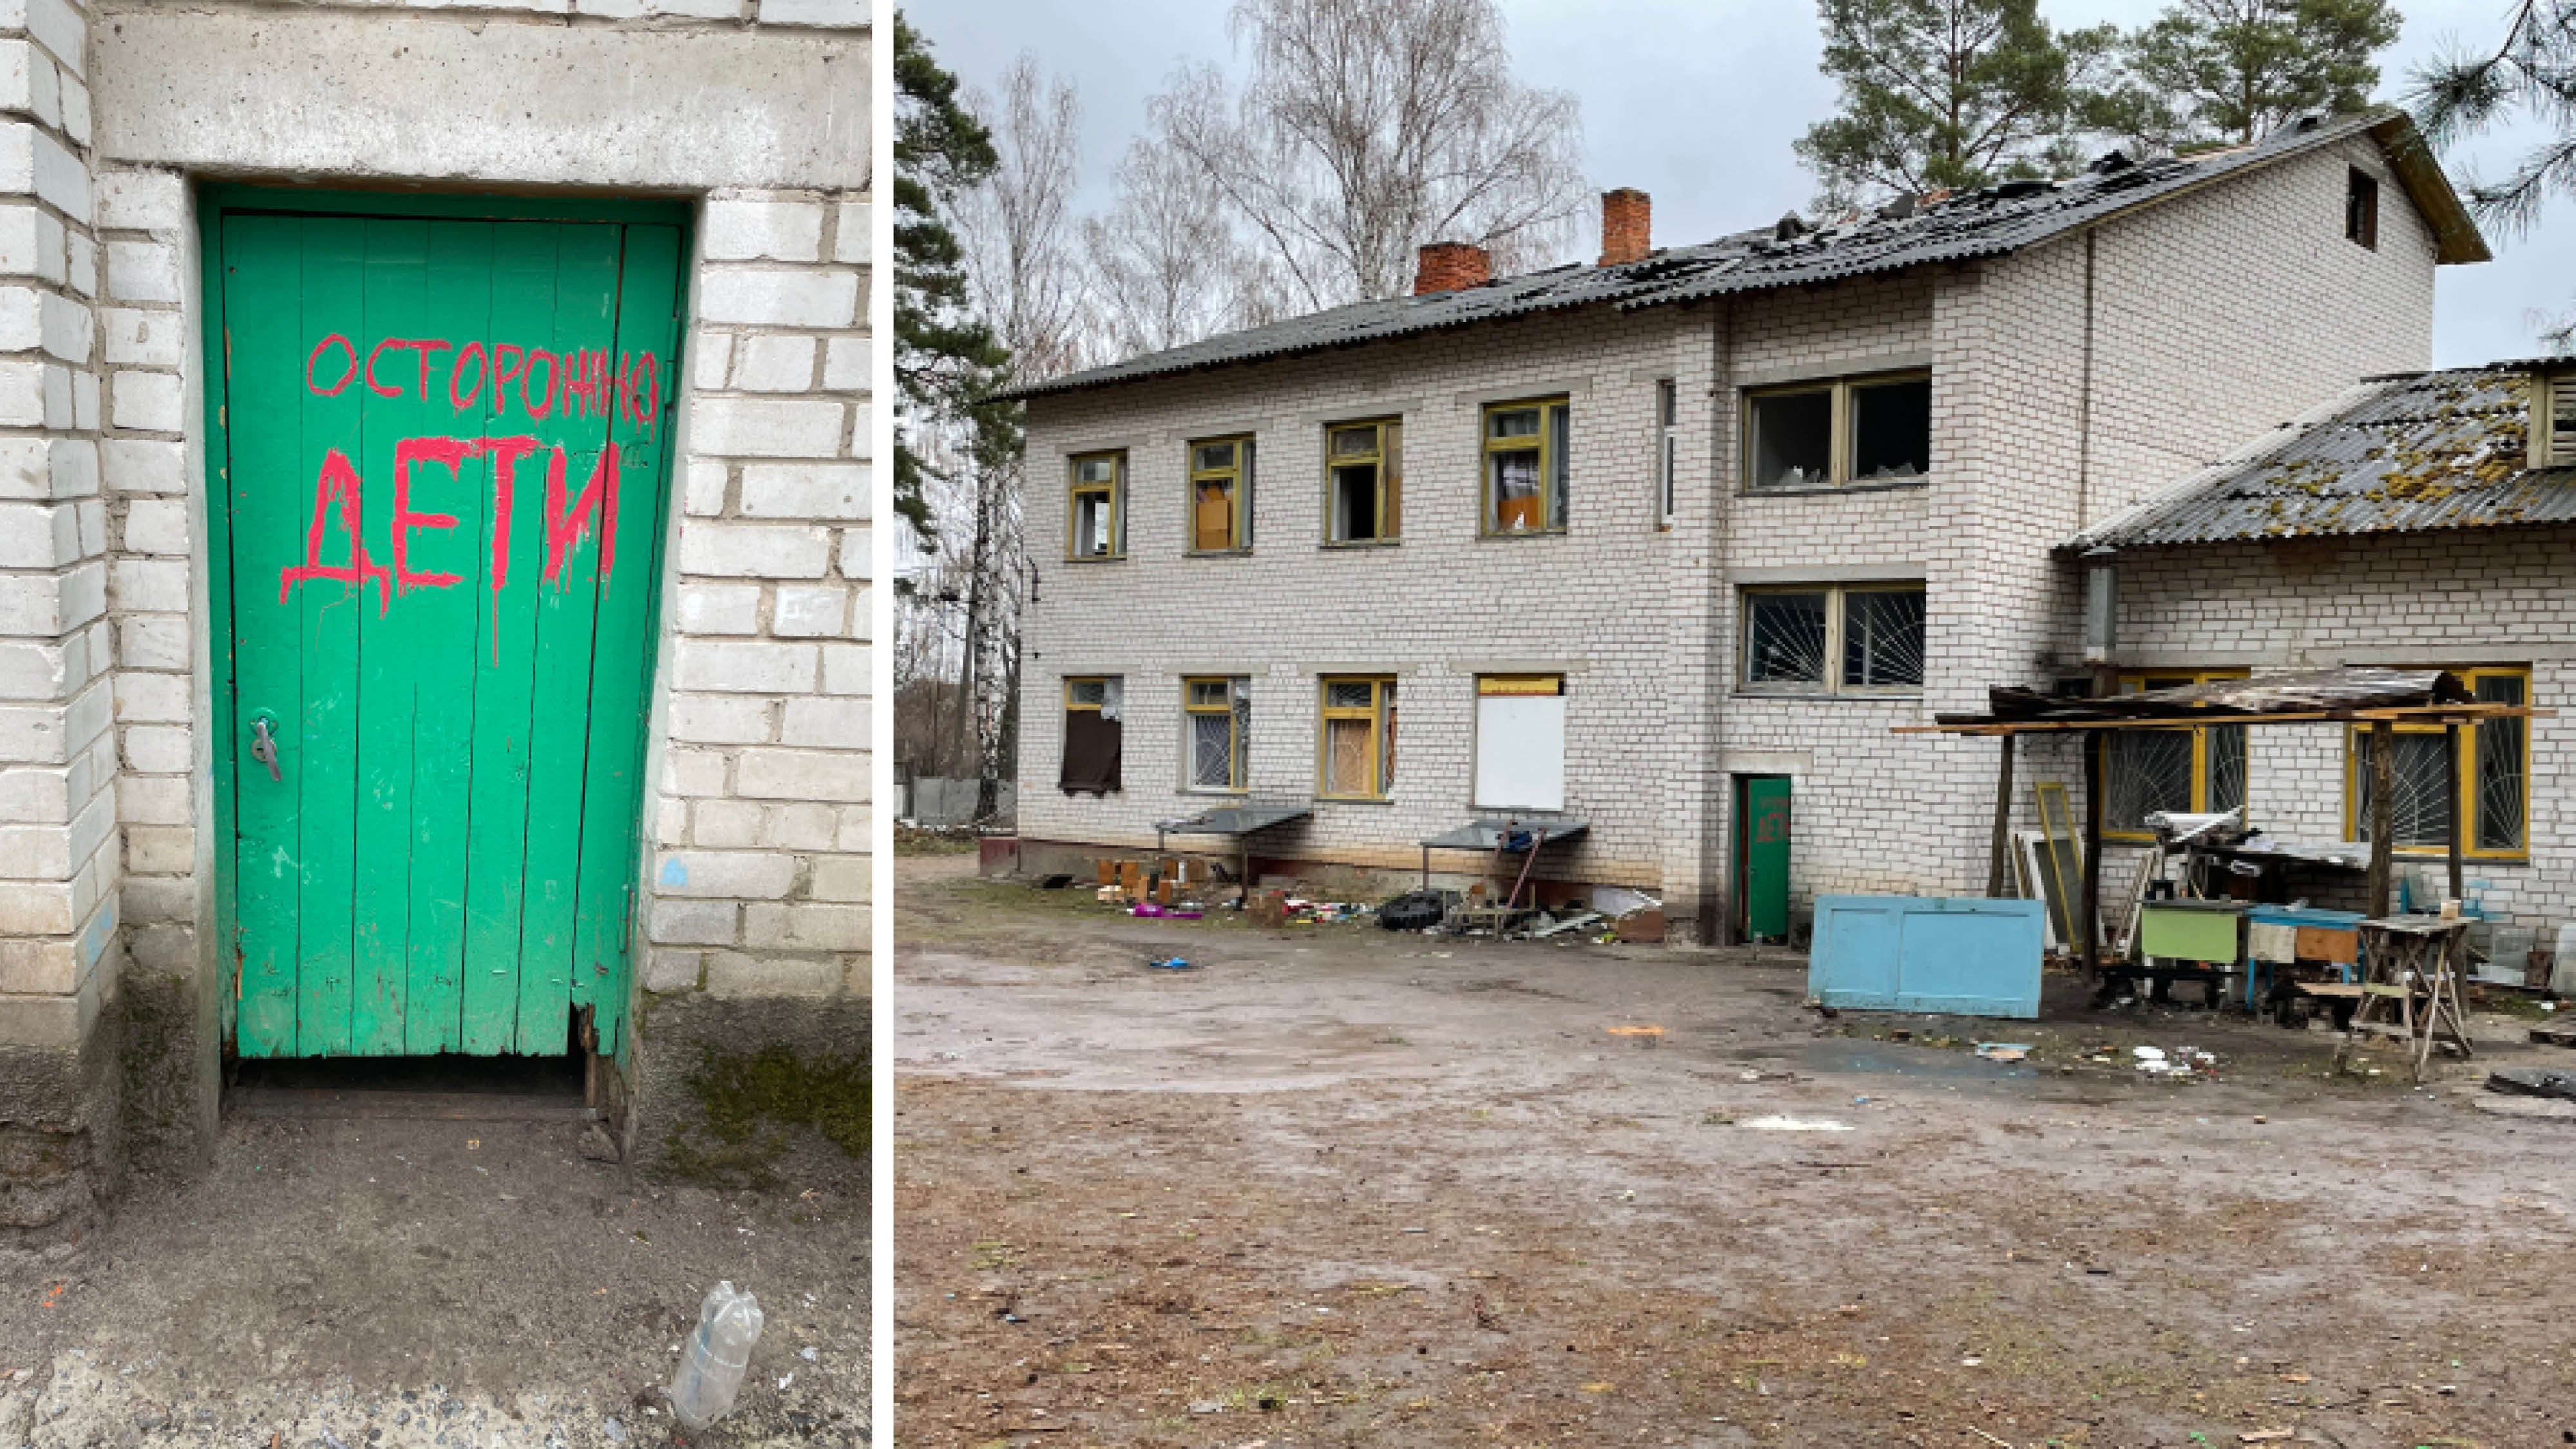 Yahidne school from behind and the green door entrance to the school basement where Russian forces held over 350 village residents for 28 days, Yahidne, April 17, 2022.